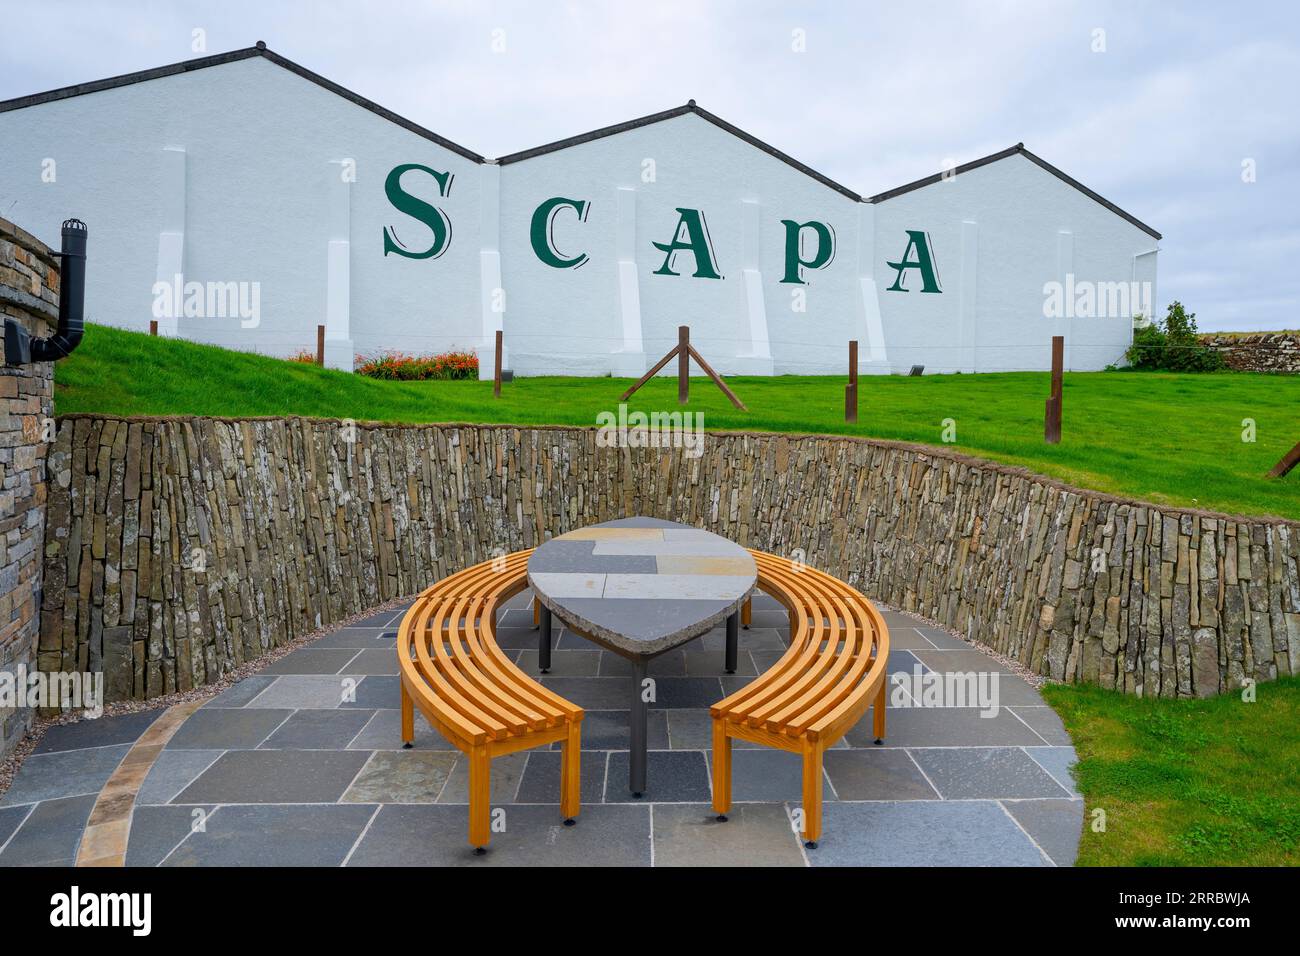 Scapa whisky distillery at Scapa, Mainland, Orkney Islands, Scotland, UK Stock Photo